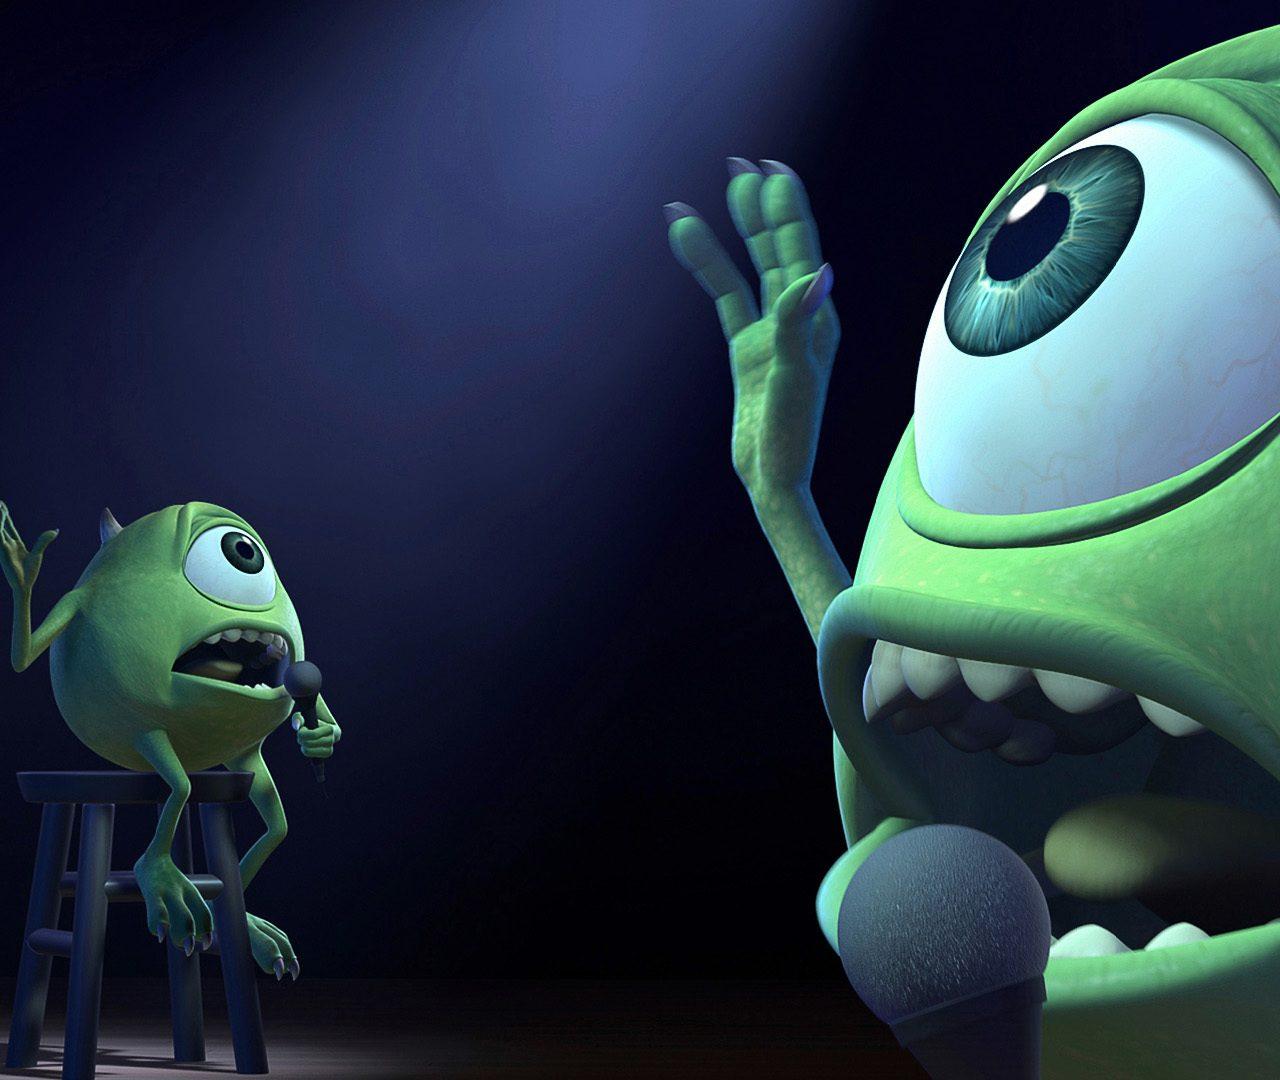 HD Wallpaper Of Mike Wazowski Singing On A Stool In Monsters Inc